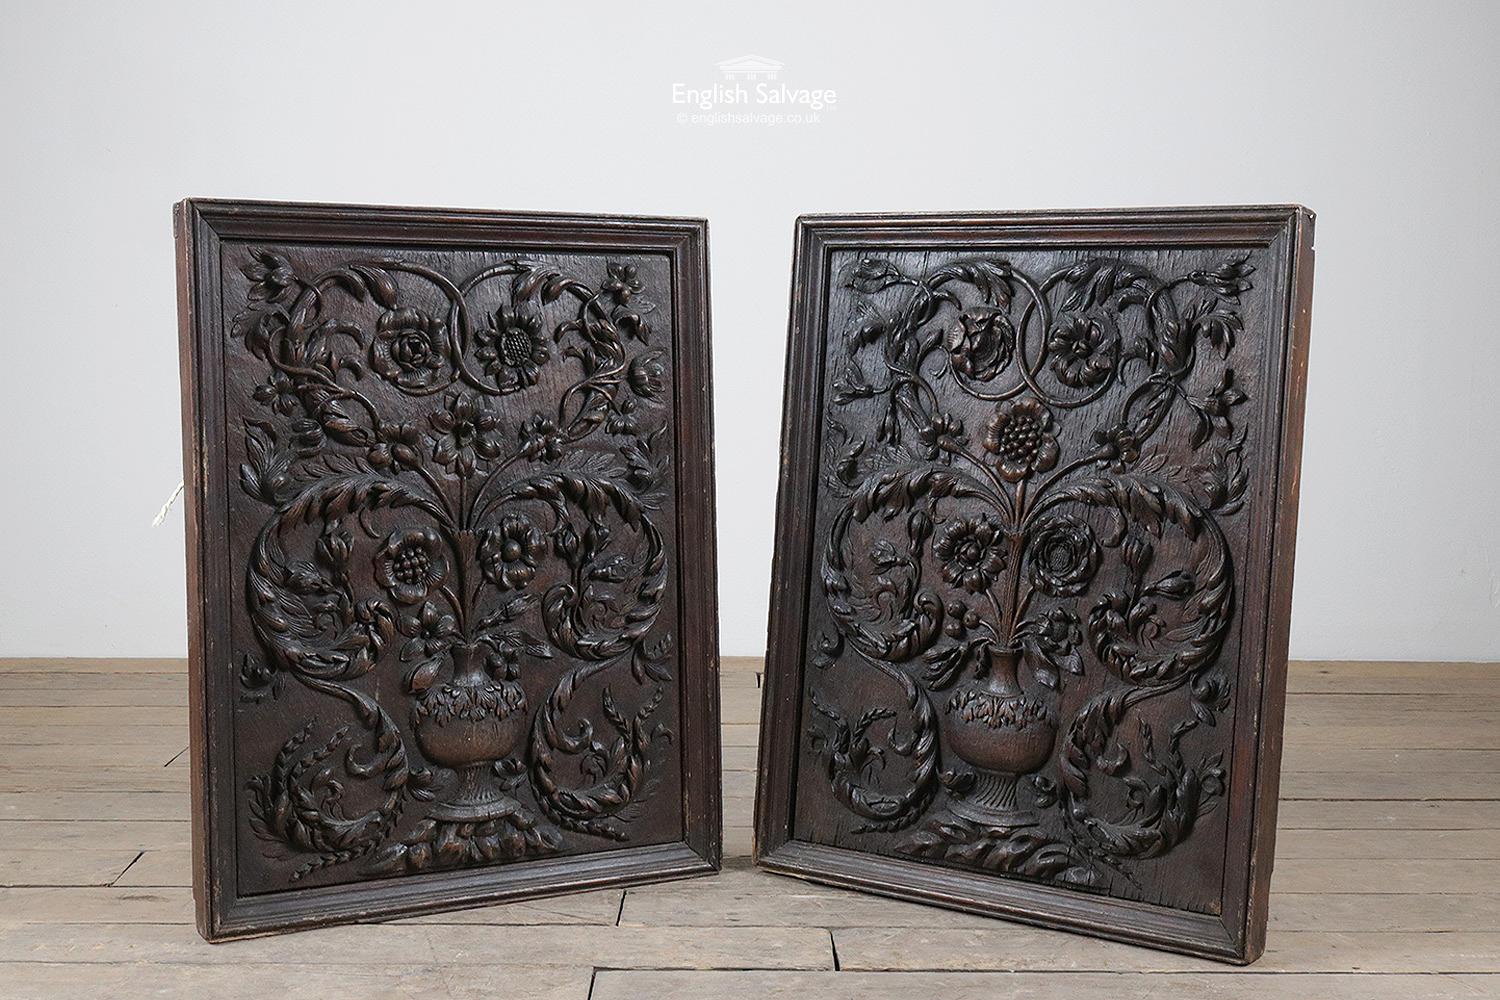 A lovely pair of very old hand carved oak panels depicting vases and an array of different flowers and foliate scrolls set in moulded frames. Beautiful and intricate detailing. Measurements given are the maximum overall, the thickness of the panels